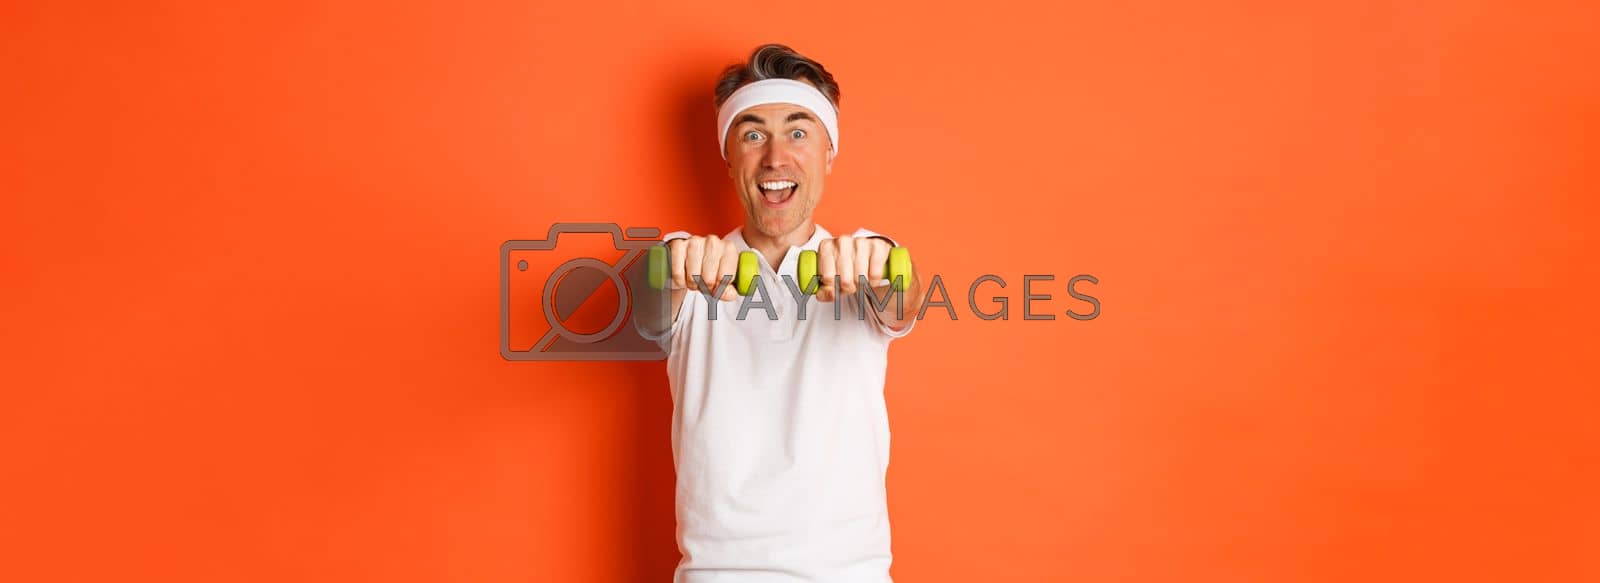 Image of active middle-aged fitness guy, doing sport exercises with dumbbells and smiling excited, standing over orange background.